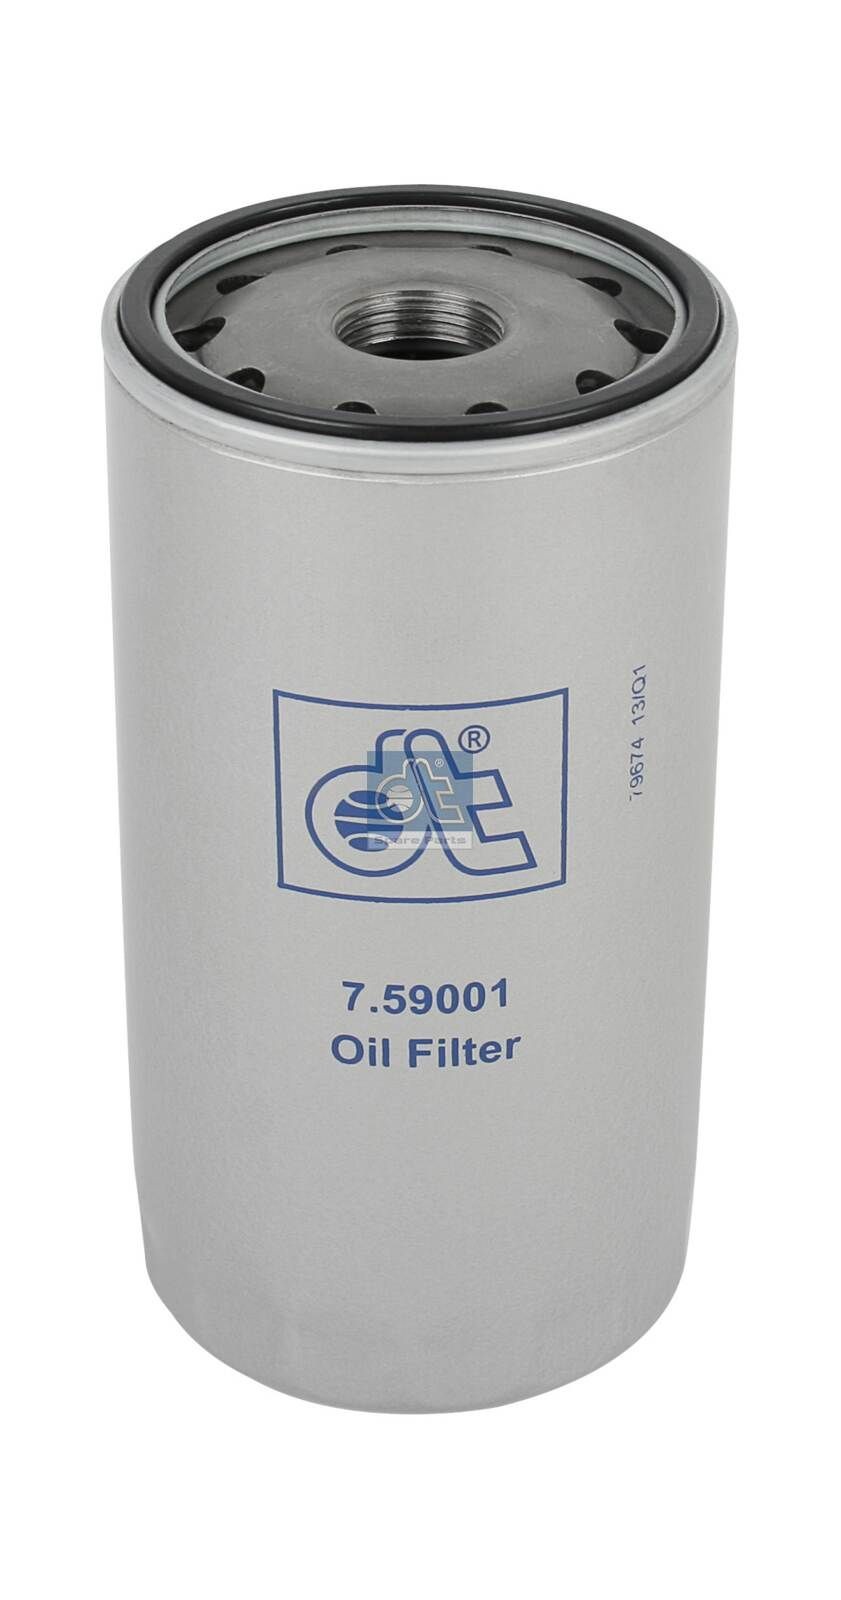 Ford MONDEO Oil filter 7344041 DT Spare Parts 7.59001 online buy